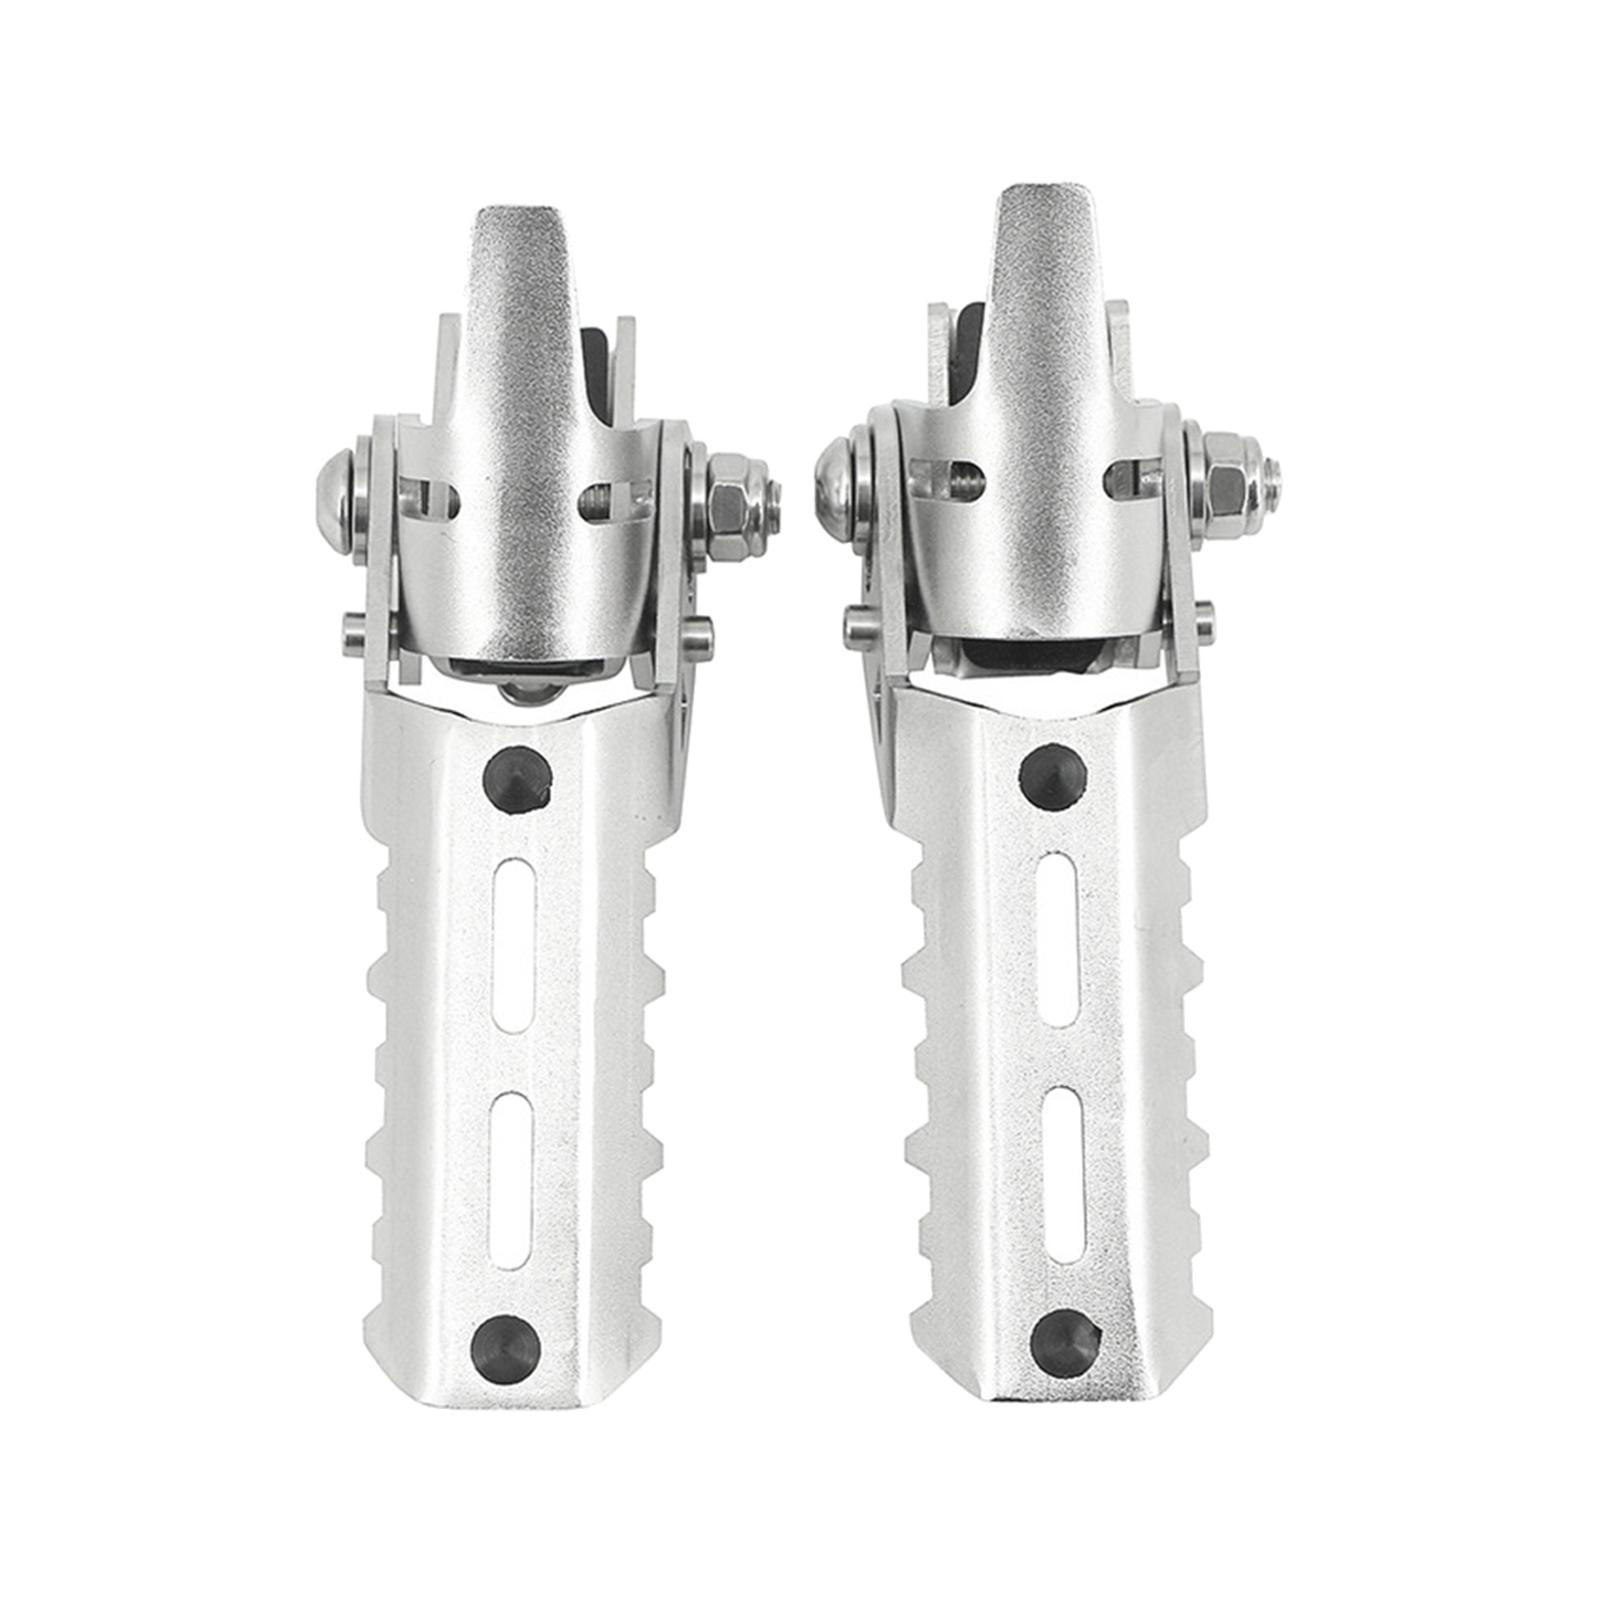 Motorcycle Highway Front Foot Pegs Direct Replaces 22-25mm Foot